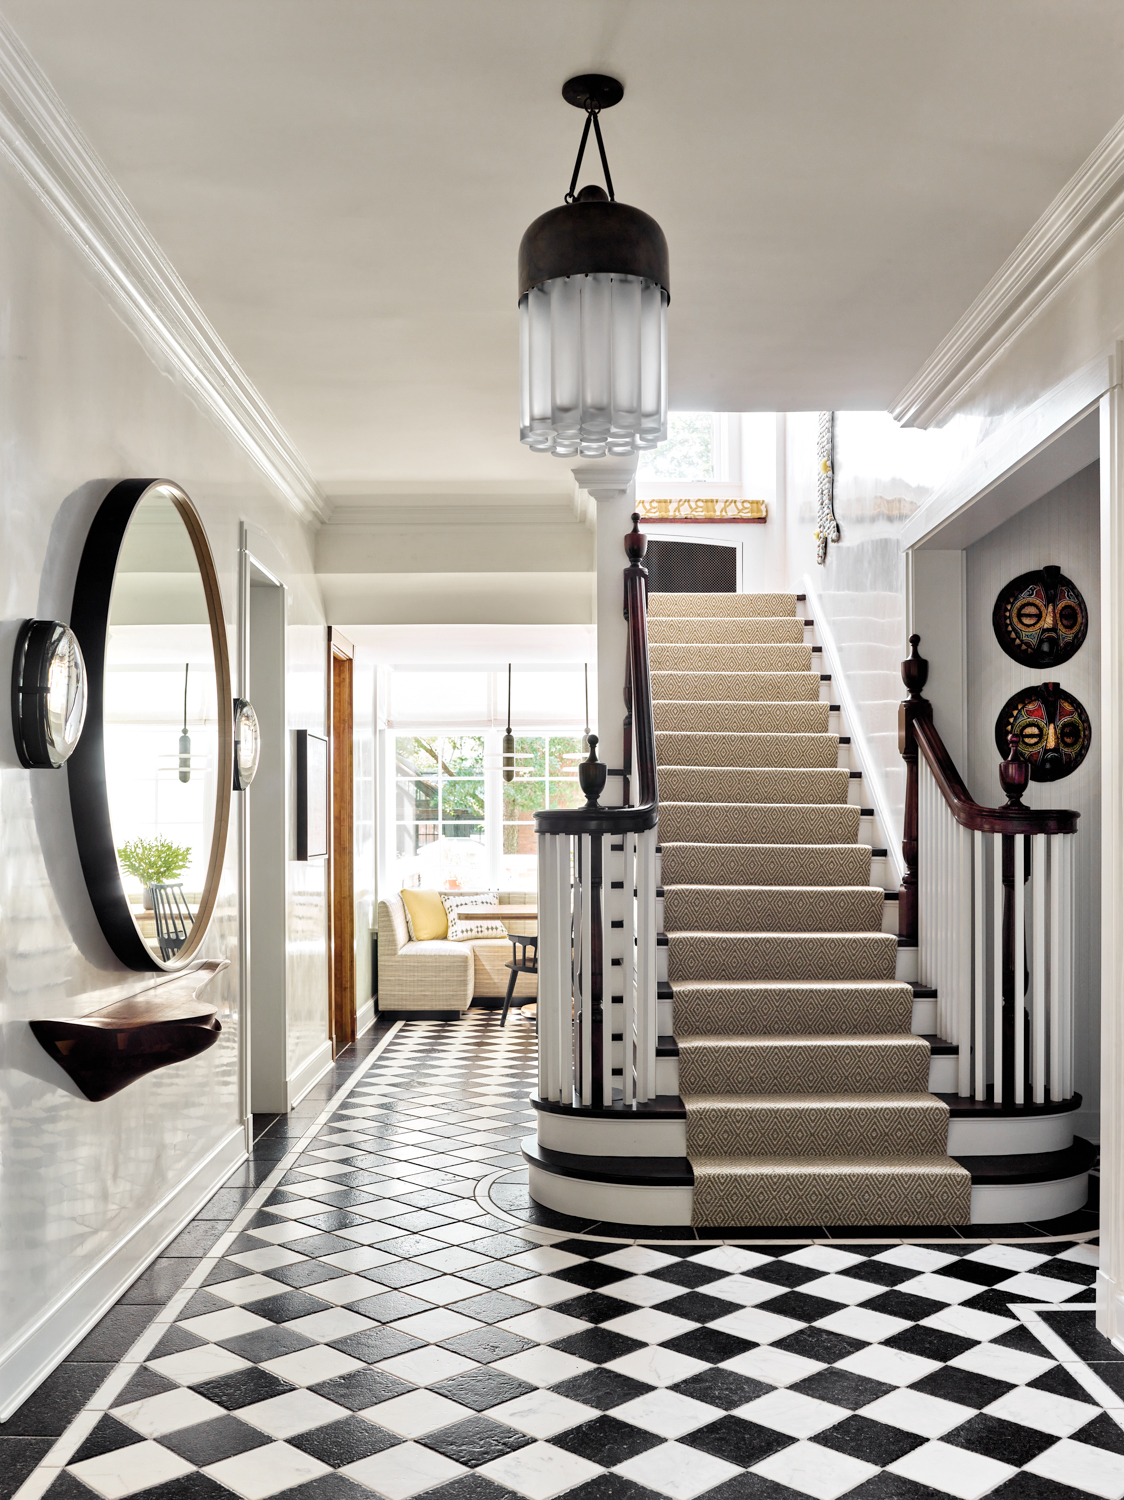 An entry with a black-and-white checkered floor and a staircase.